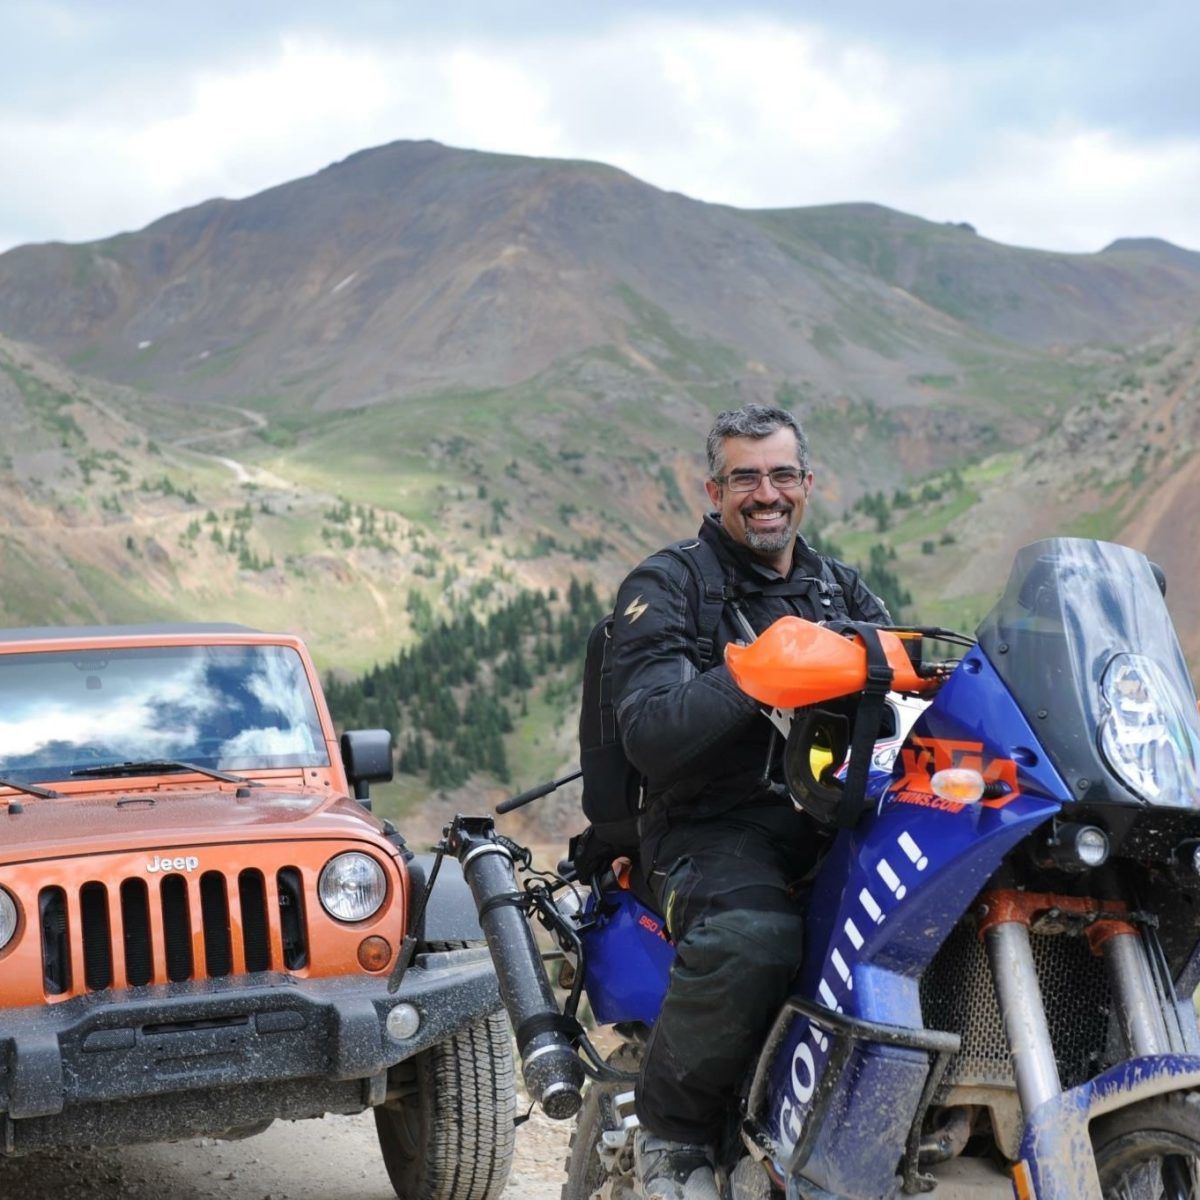 All Kids Bike ambassador Robert Pandya on a blue motocycle with an orange jeep and a mountainscape in the background